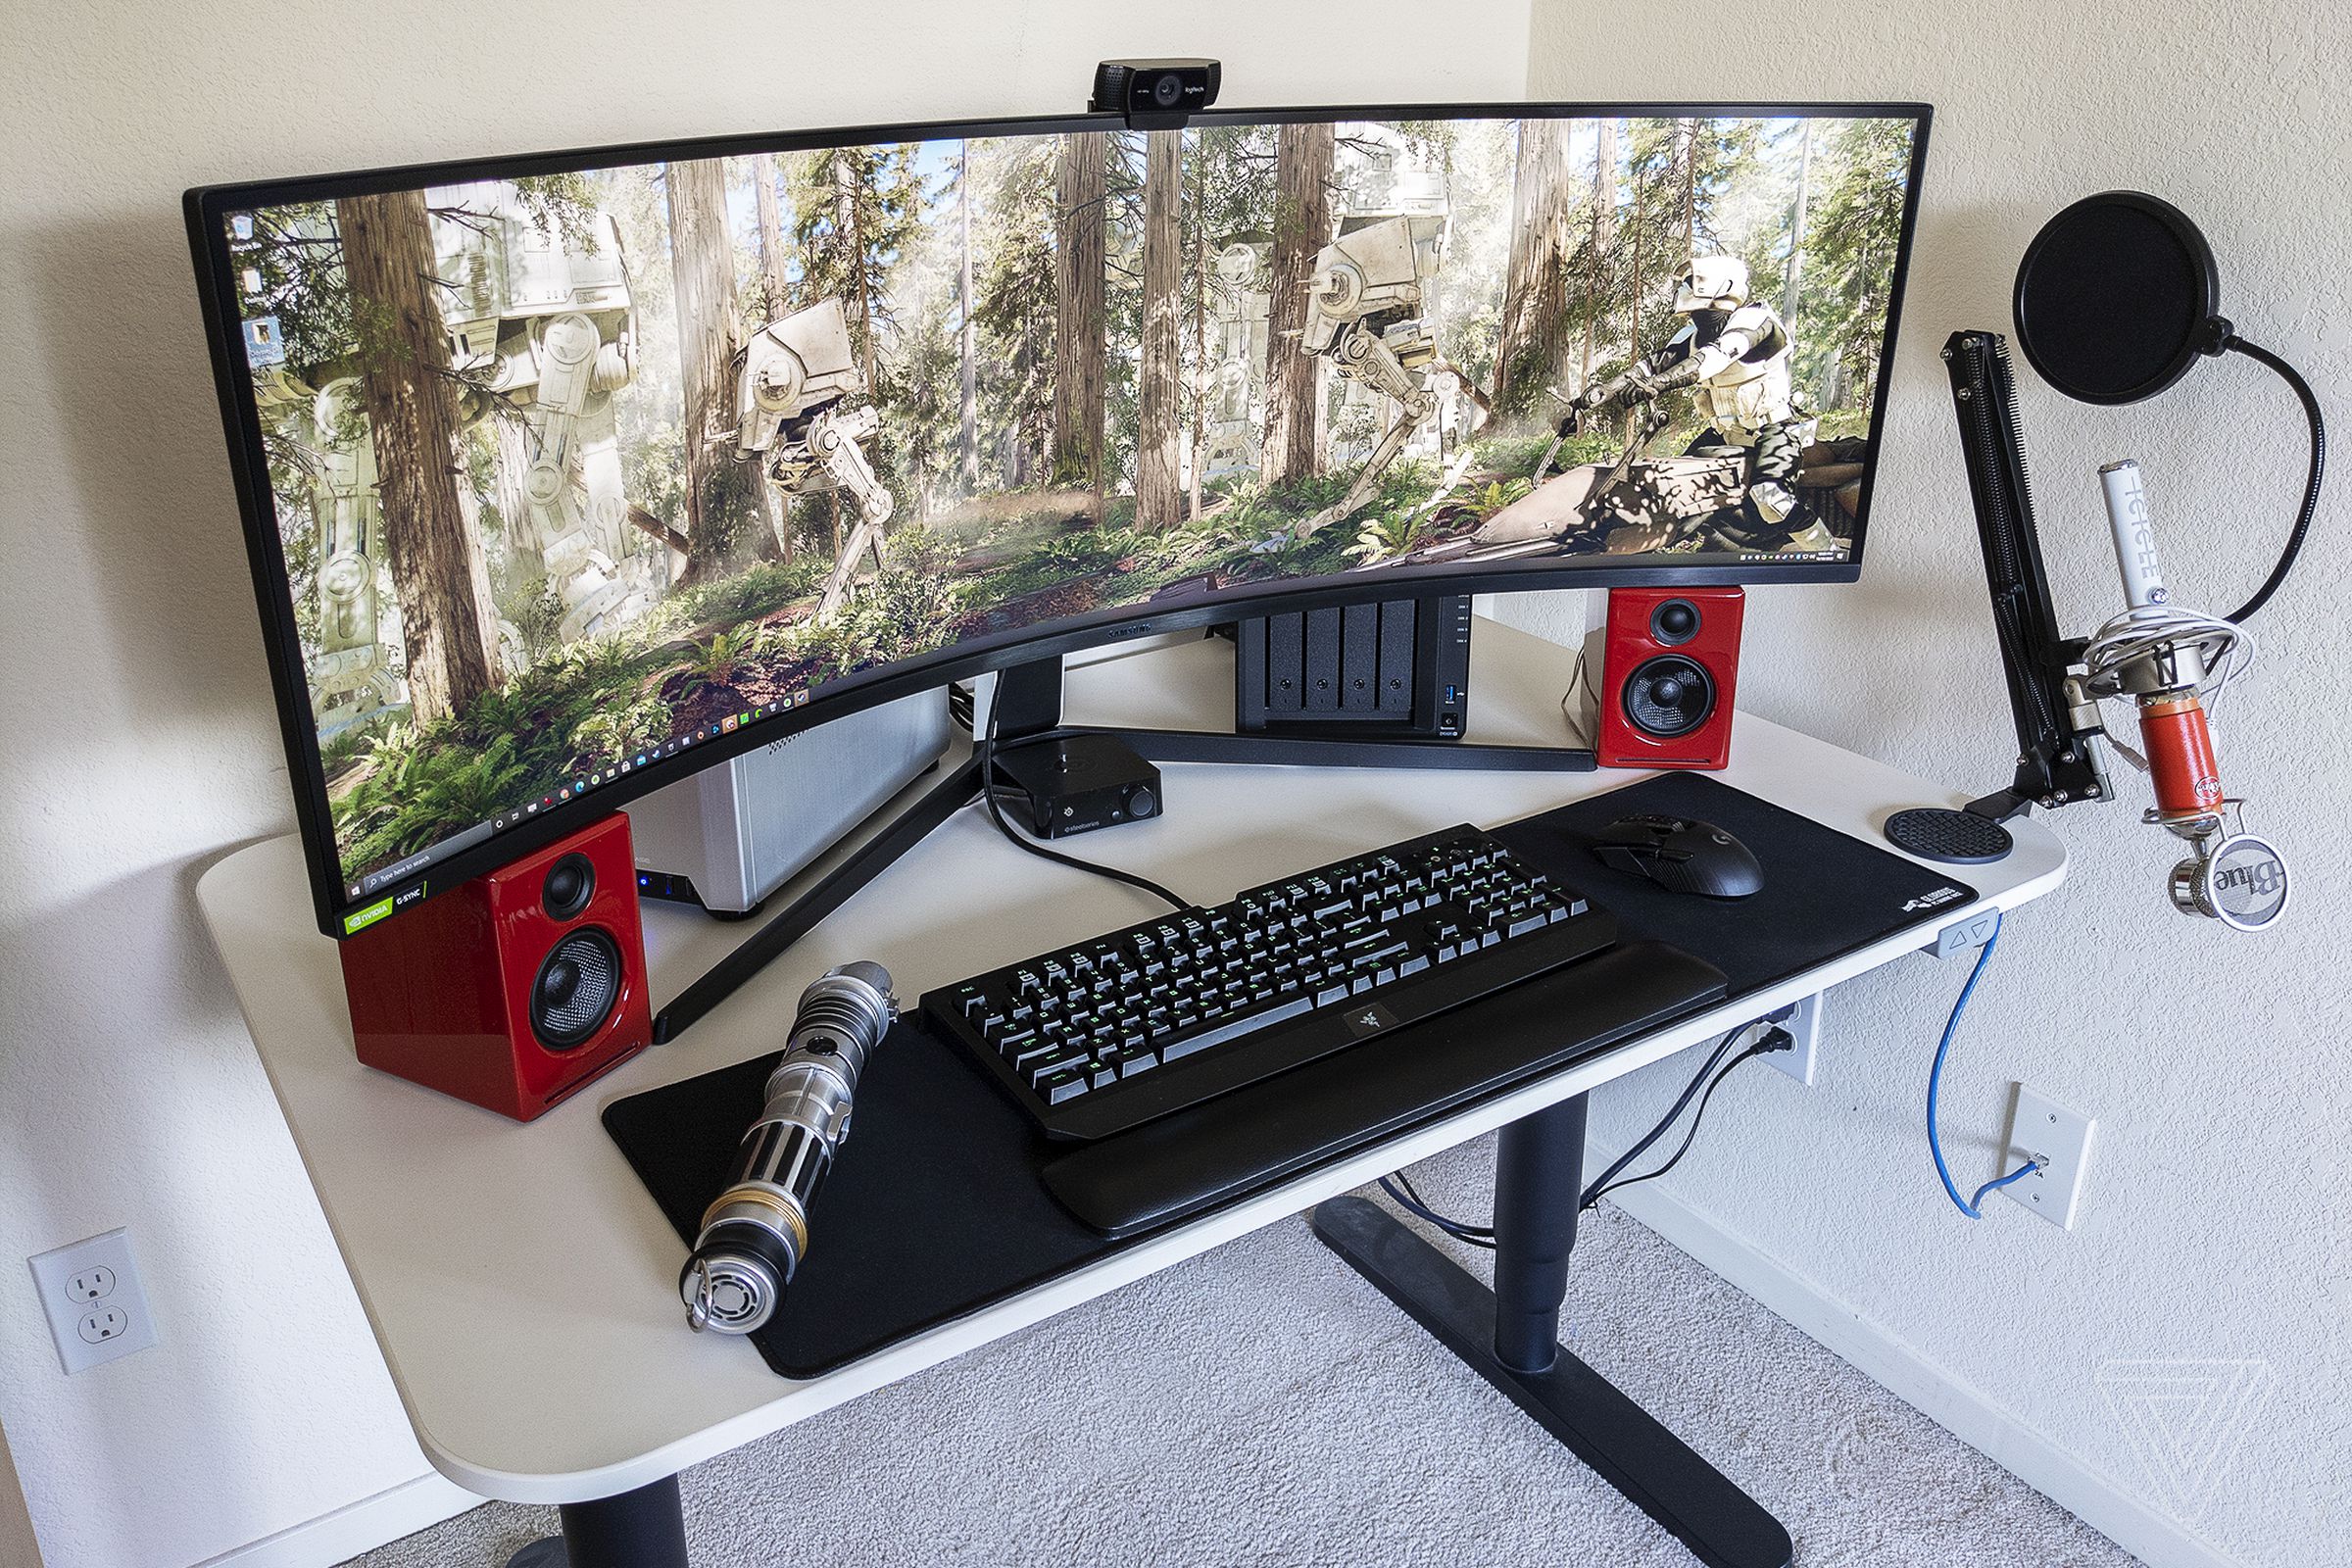 You might need to rearrange your entire desk around a super-ultrawide like the Samsung Odyssey G9.